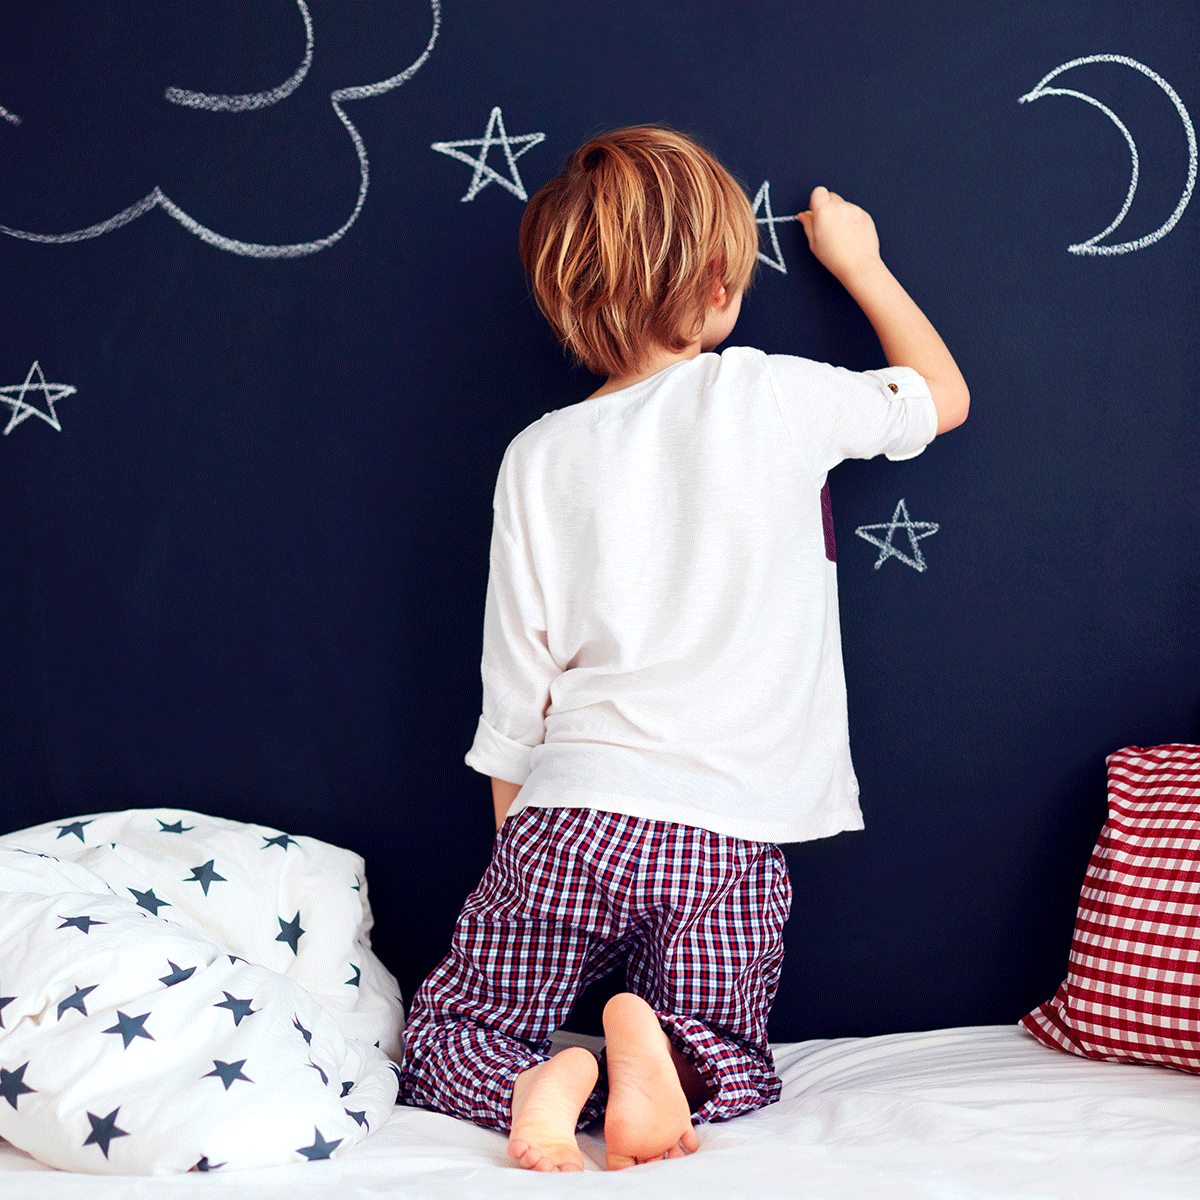 How to Paint a Chalkboard Wall 